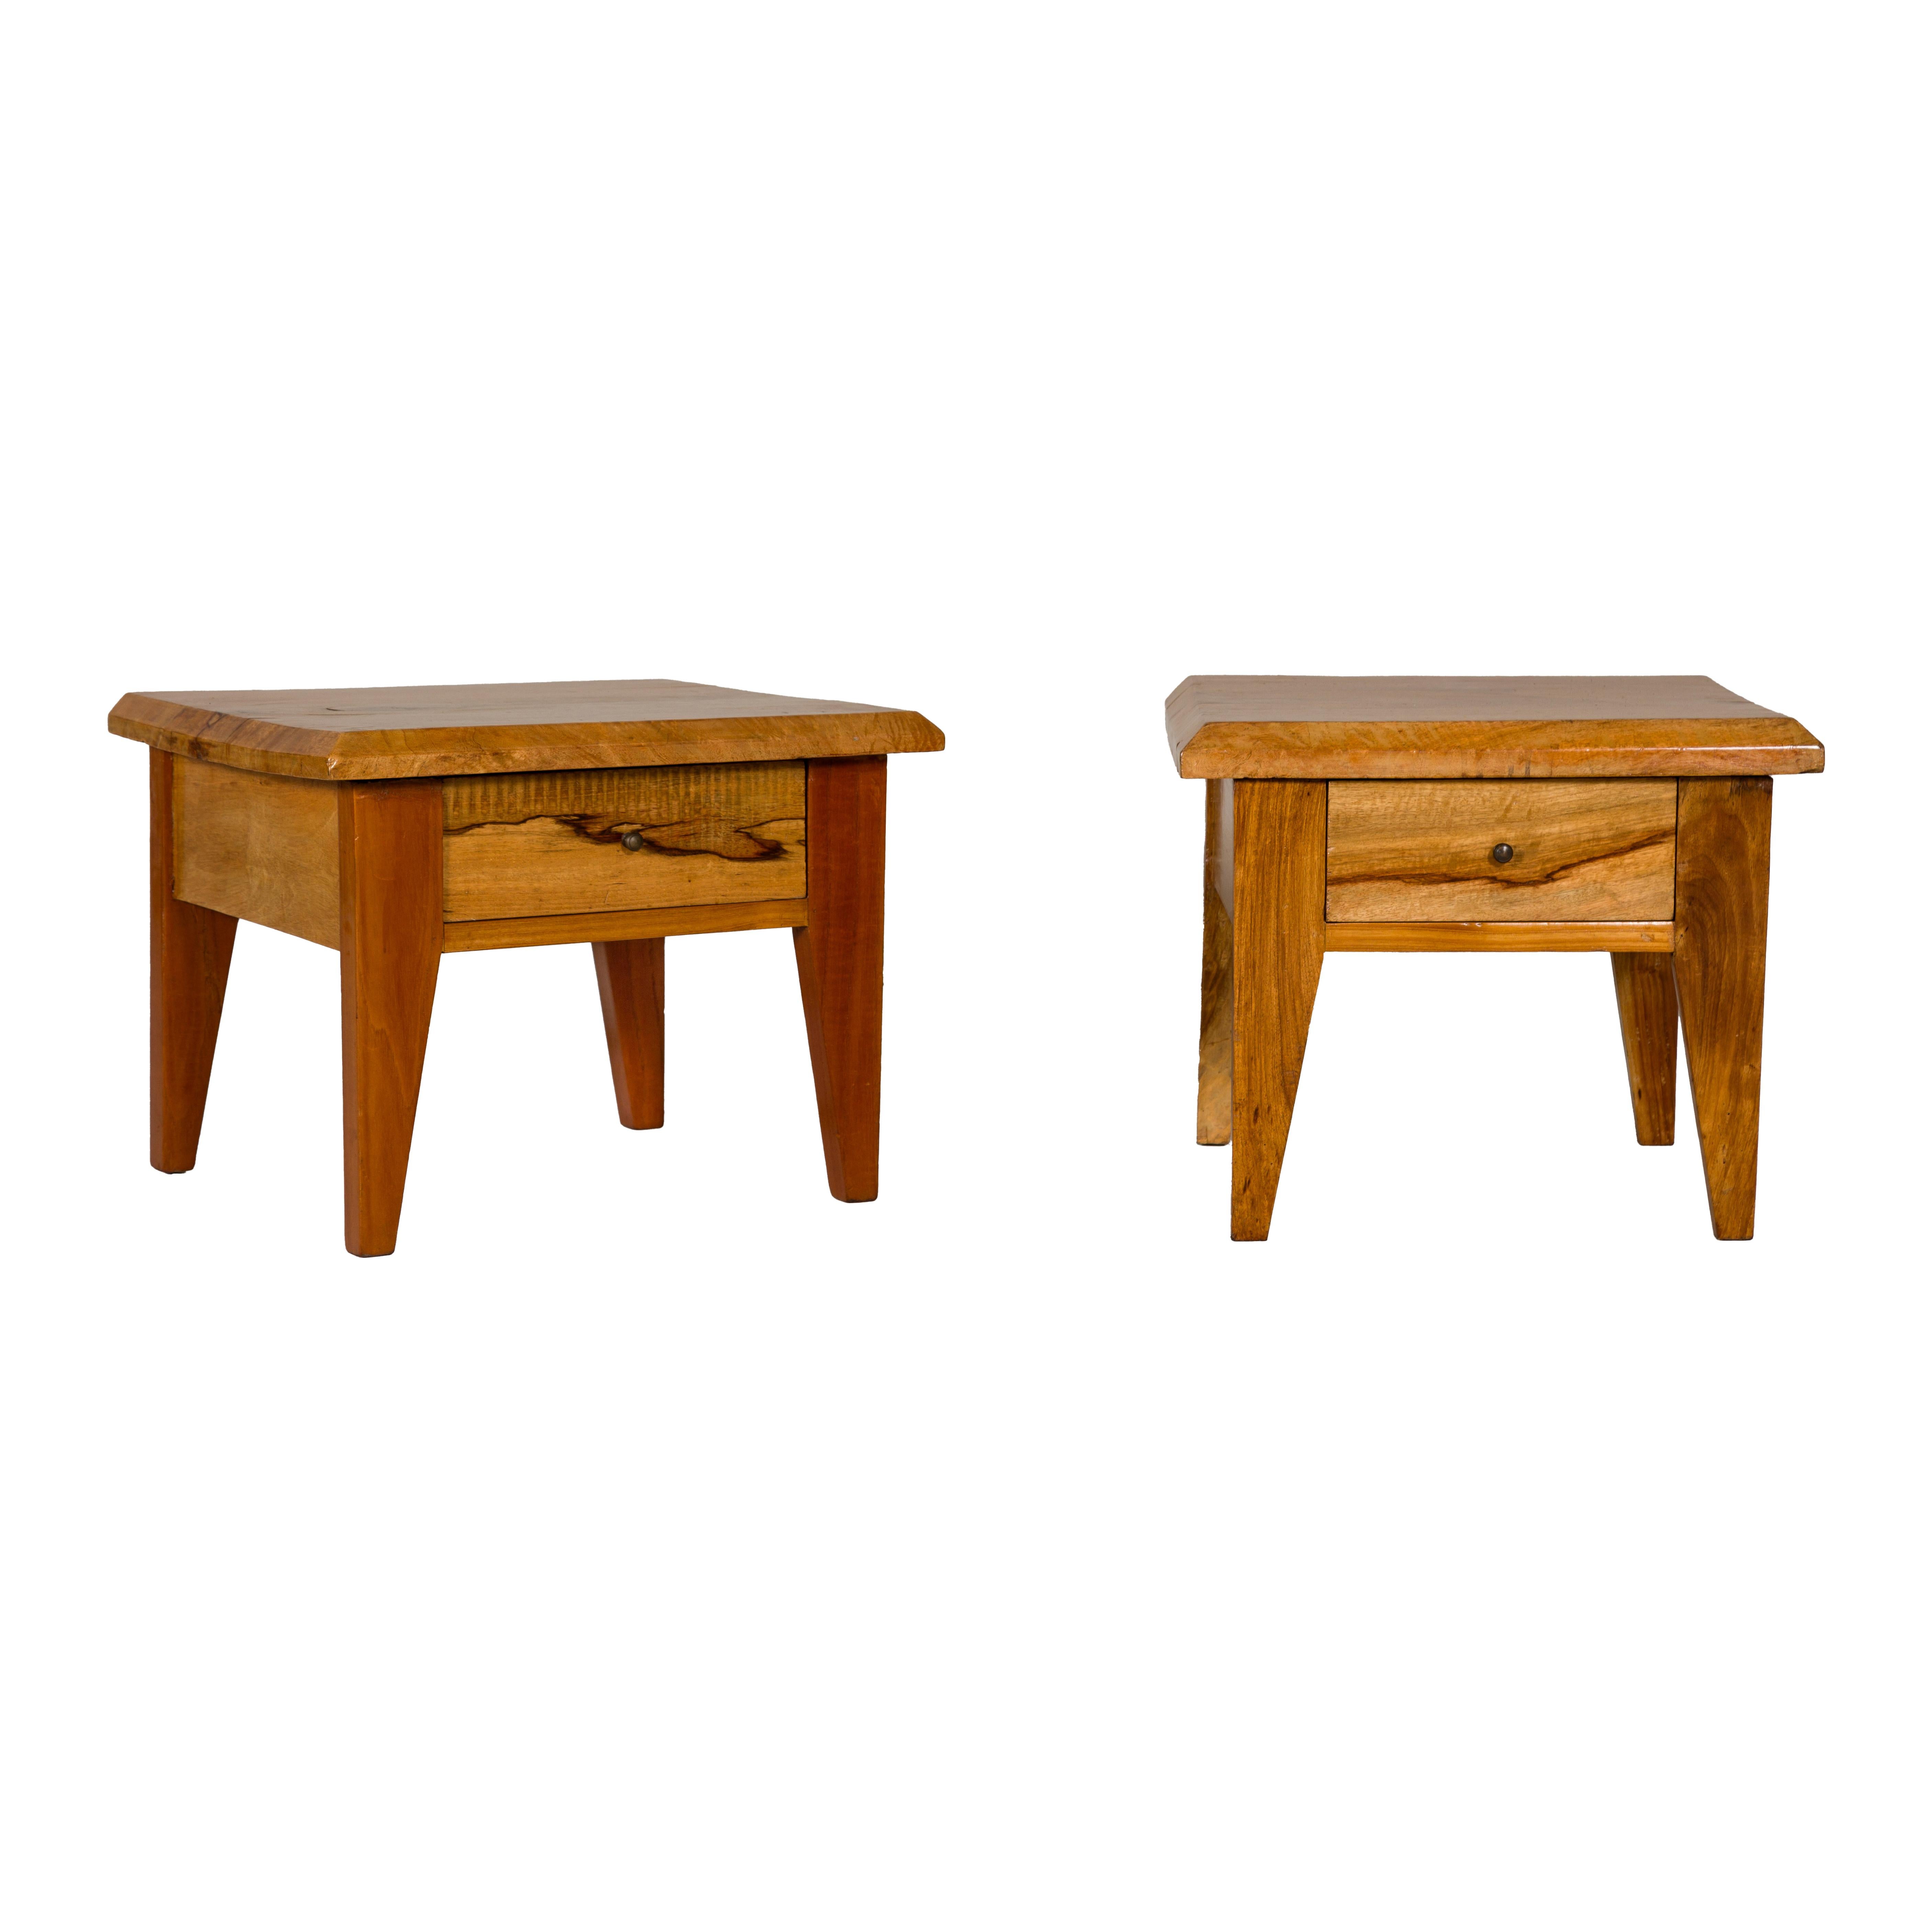 Near Pair of Mango Wood Midcentury Low Side Tables with Single Drawers For Sale 12